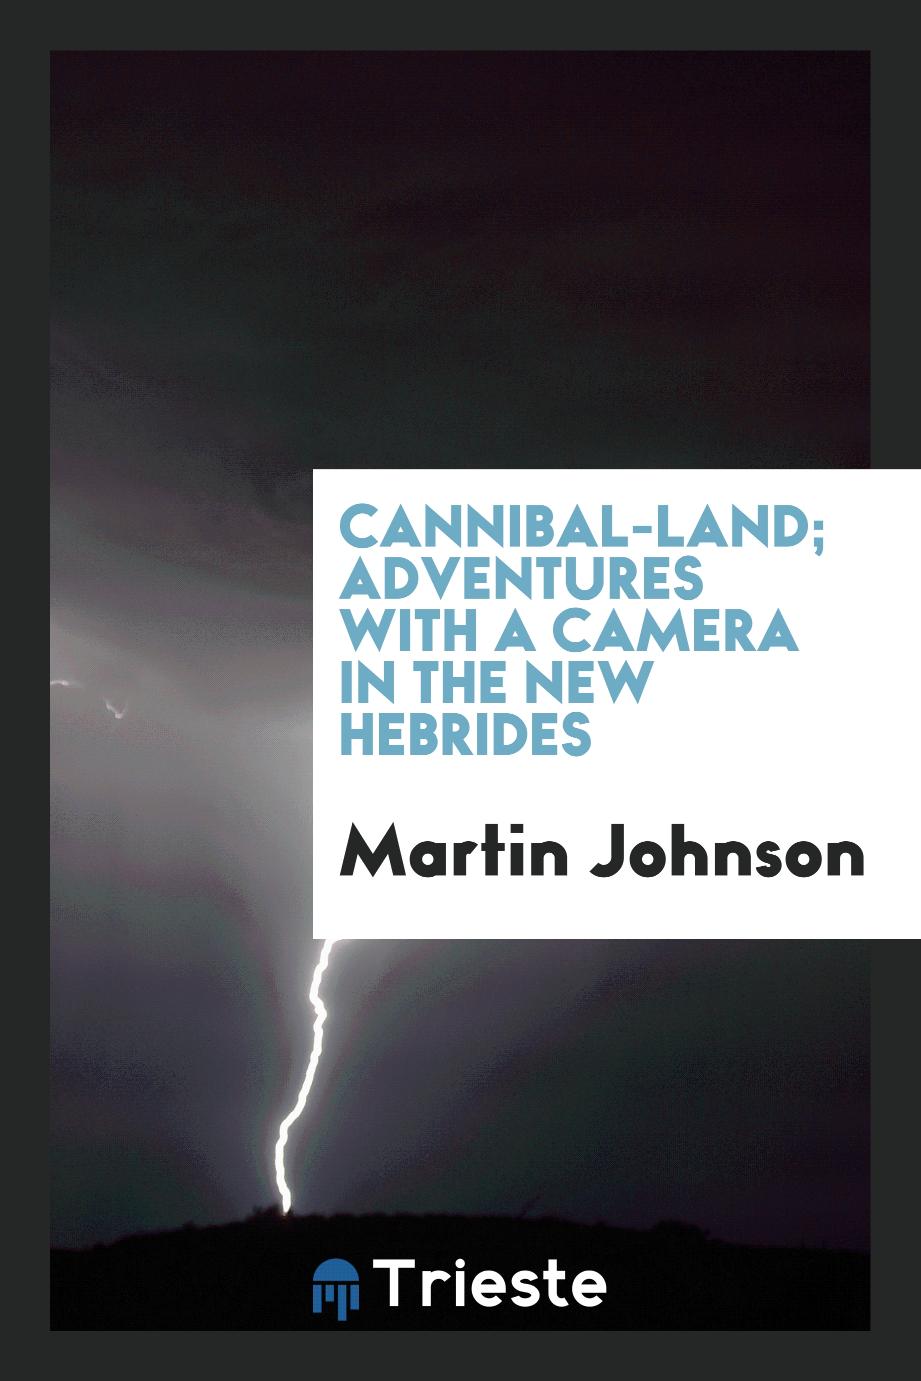 Cannibal-land; adventures with a camera in the New Hebrides